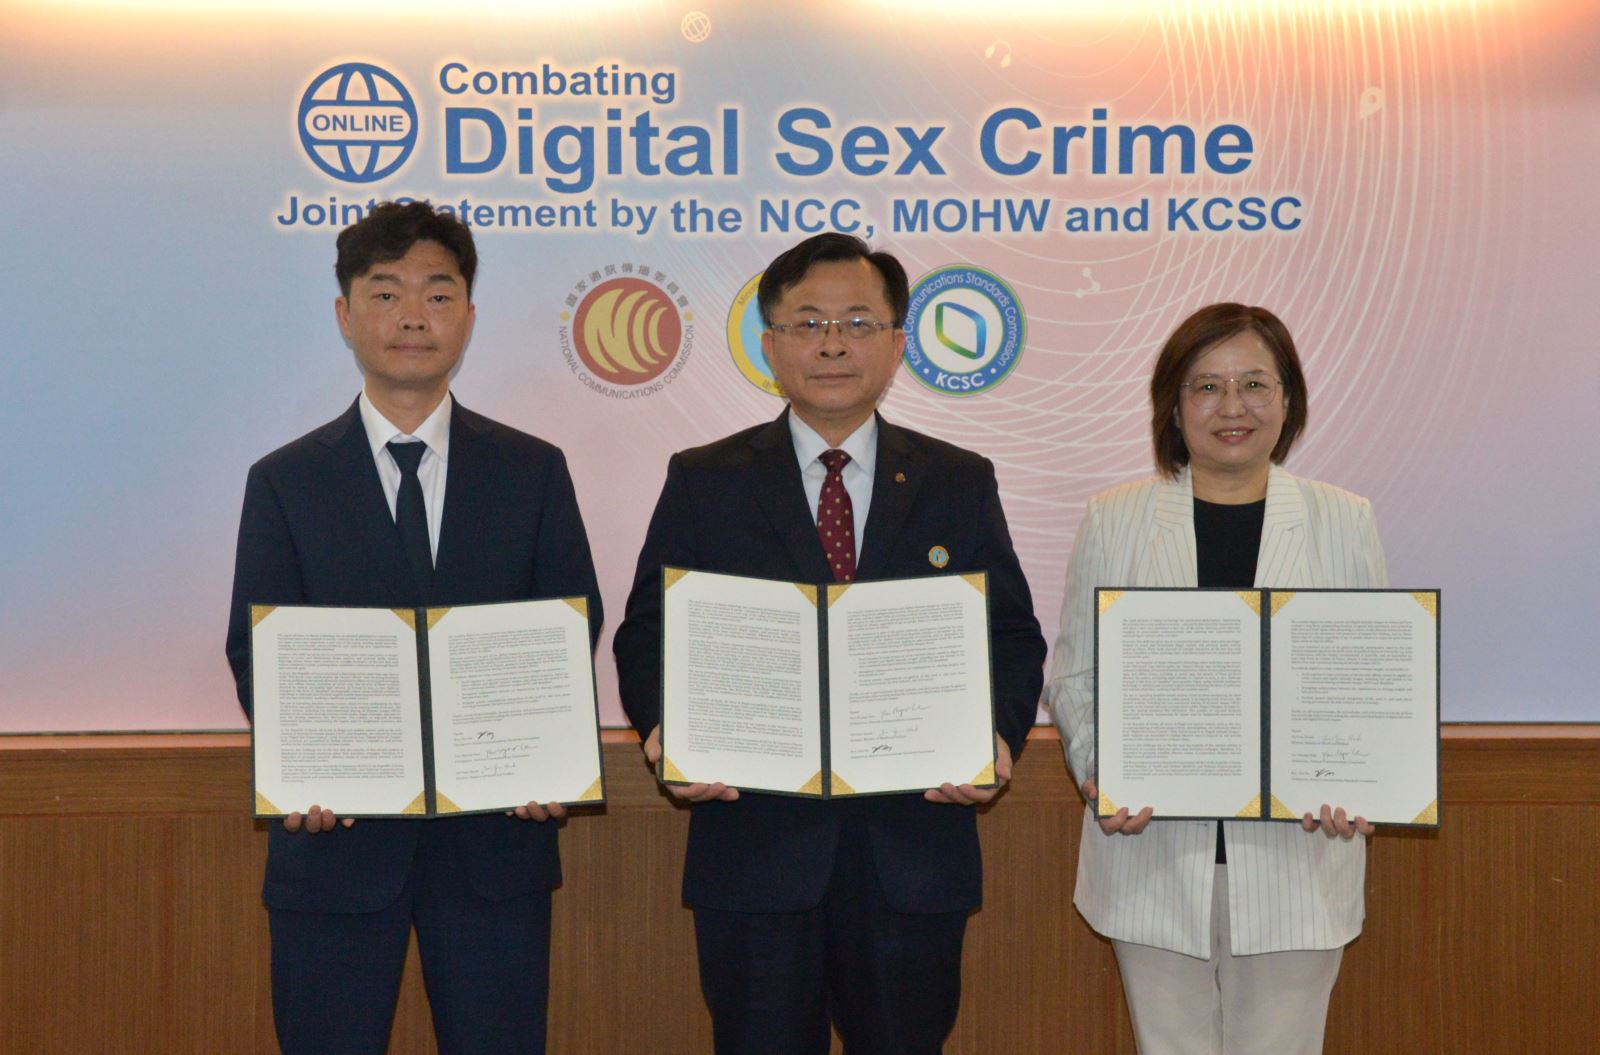 Photo 2: NCC Chairperson Chen Yaw-Shyang (center), MOHW Deputy Minister Lee Li-Feng (right) and KCSC Head of Digital Sex Crime Content Review Bureau Lee Dong-su (left)